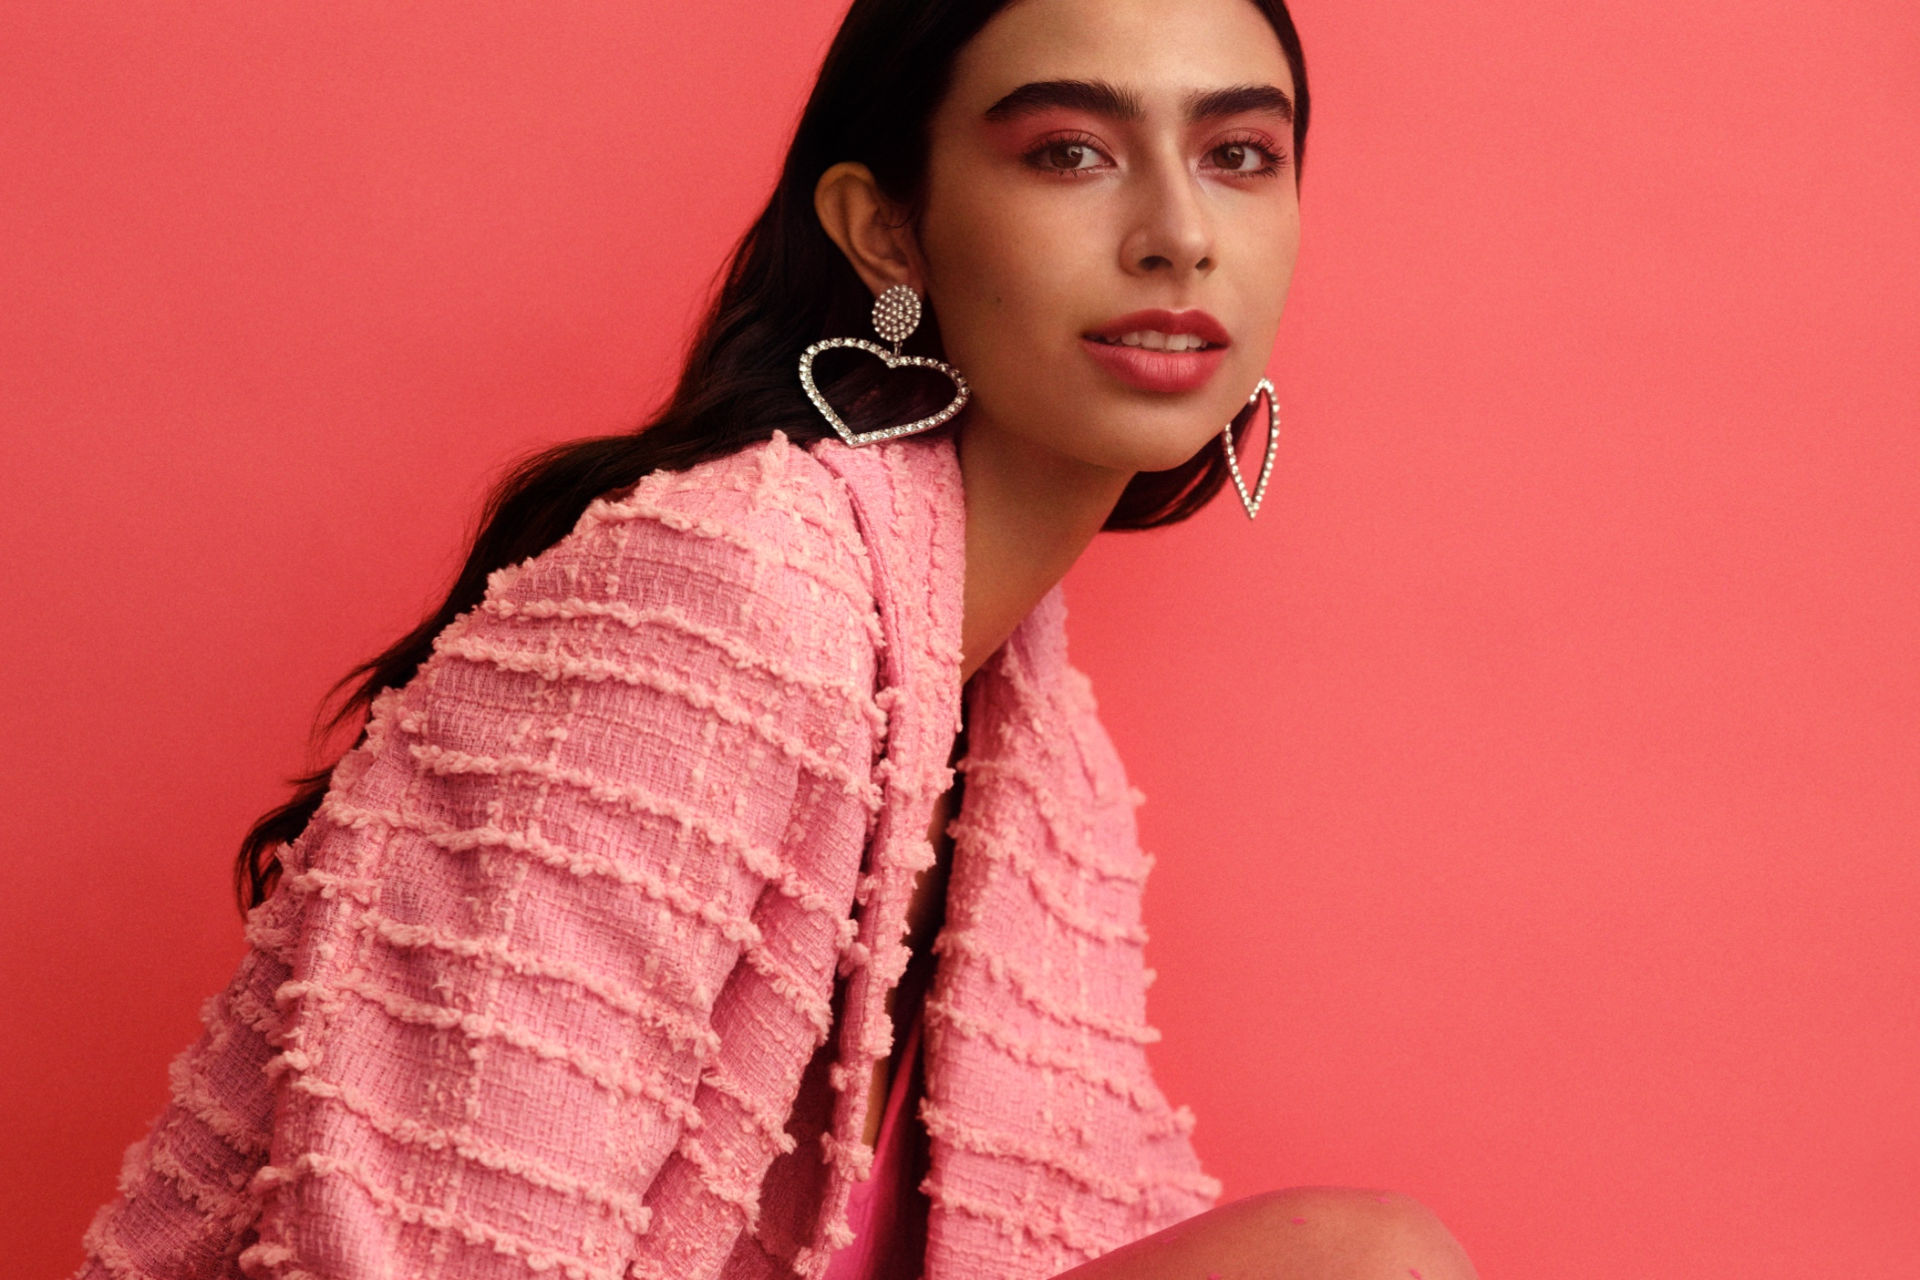 Beauty Valentine’s gifts: H&M Crushing on Beauty campaign image featuring a model with pink jacket and makeup on red background